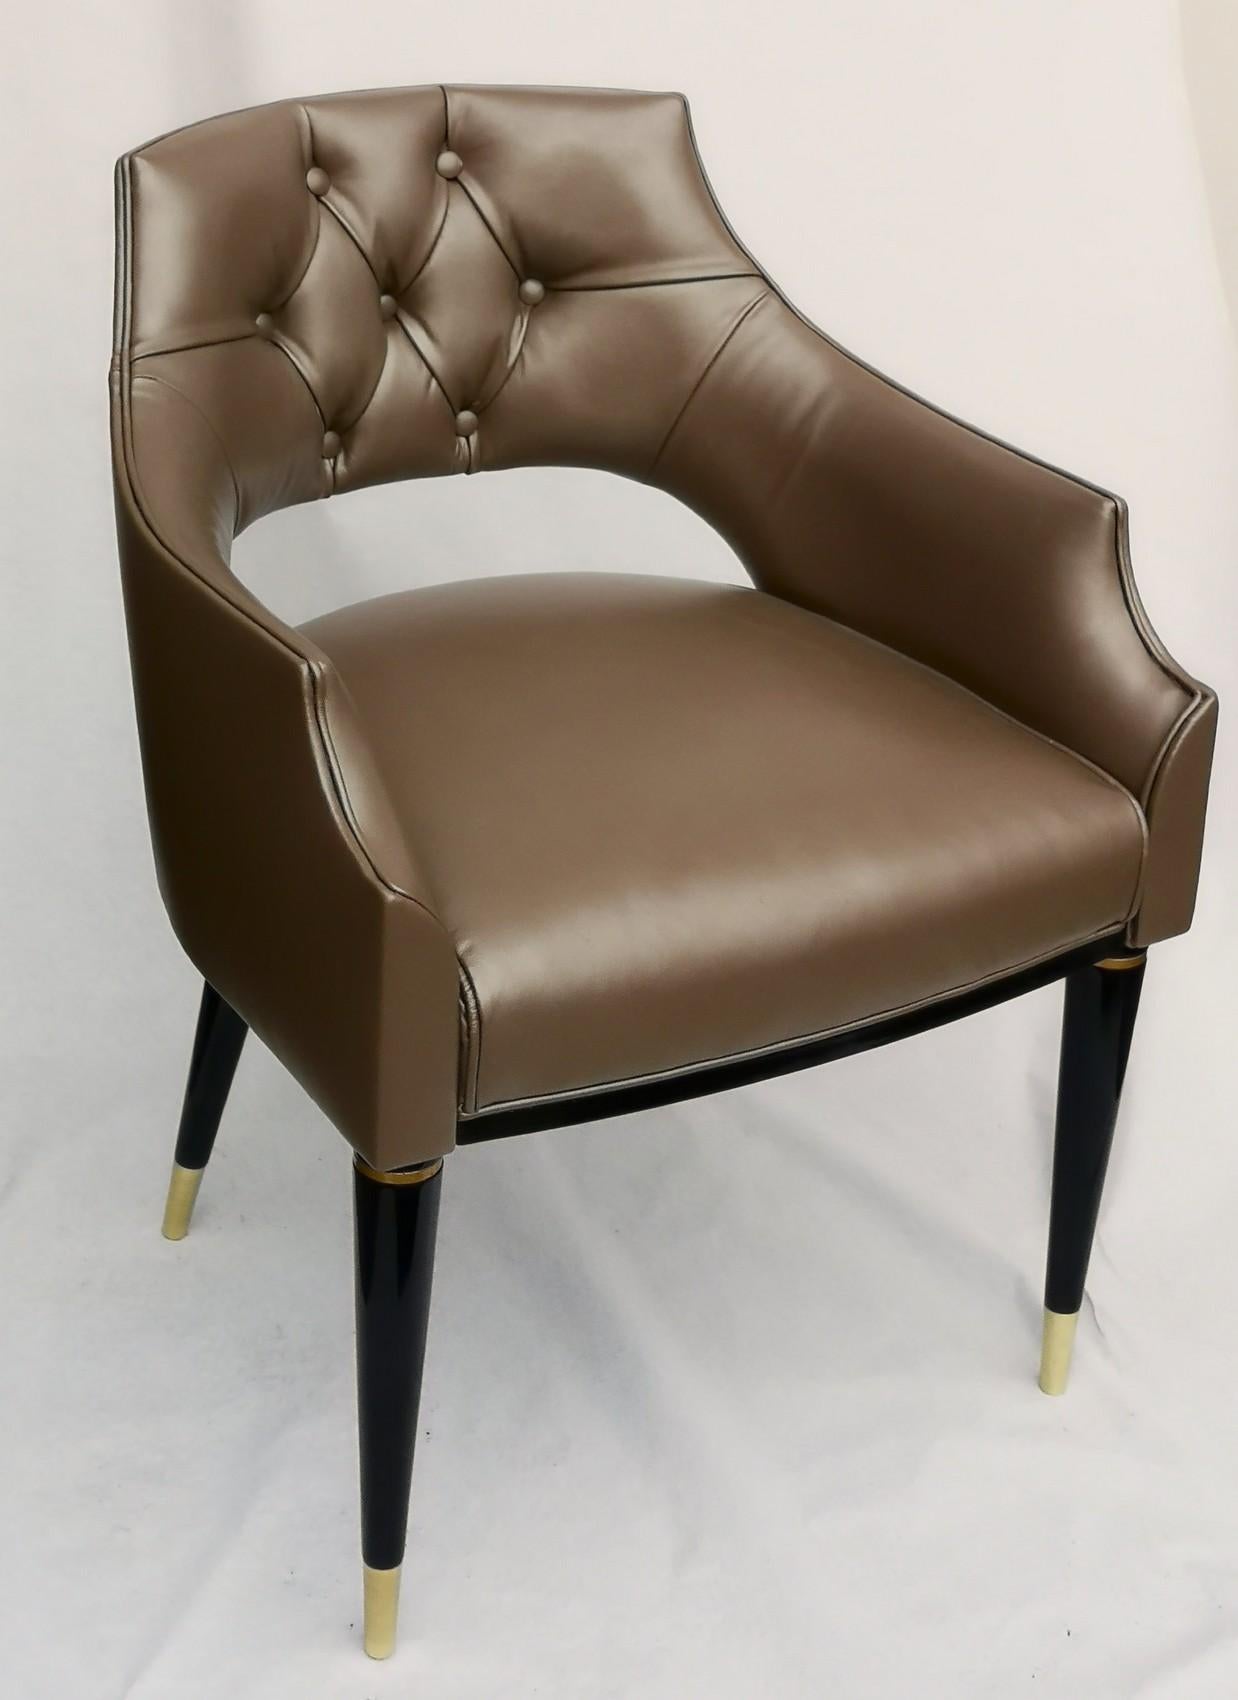 Great and comfortable dining chair in fiore leather. This successful dining chair is now offered in primo fiore leather.
Source of leather is a top tannery in Vicenza (one of the two areas for quality leather in Italy) and stitched upholstered in